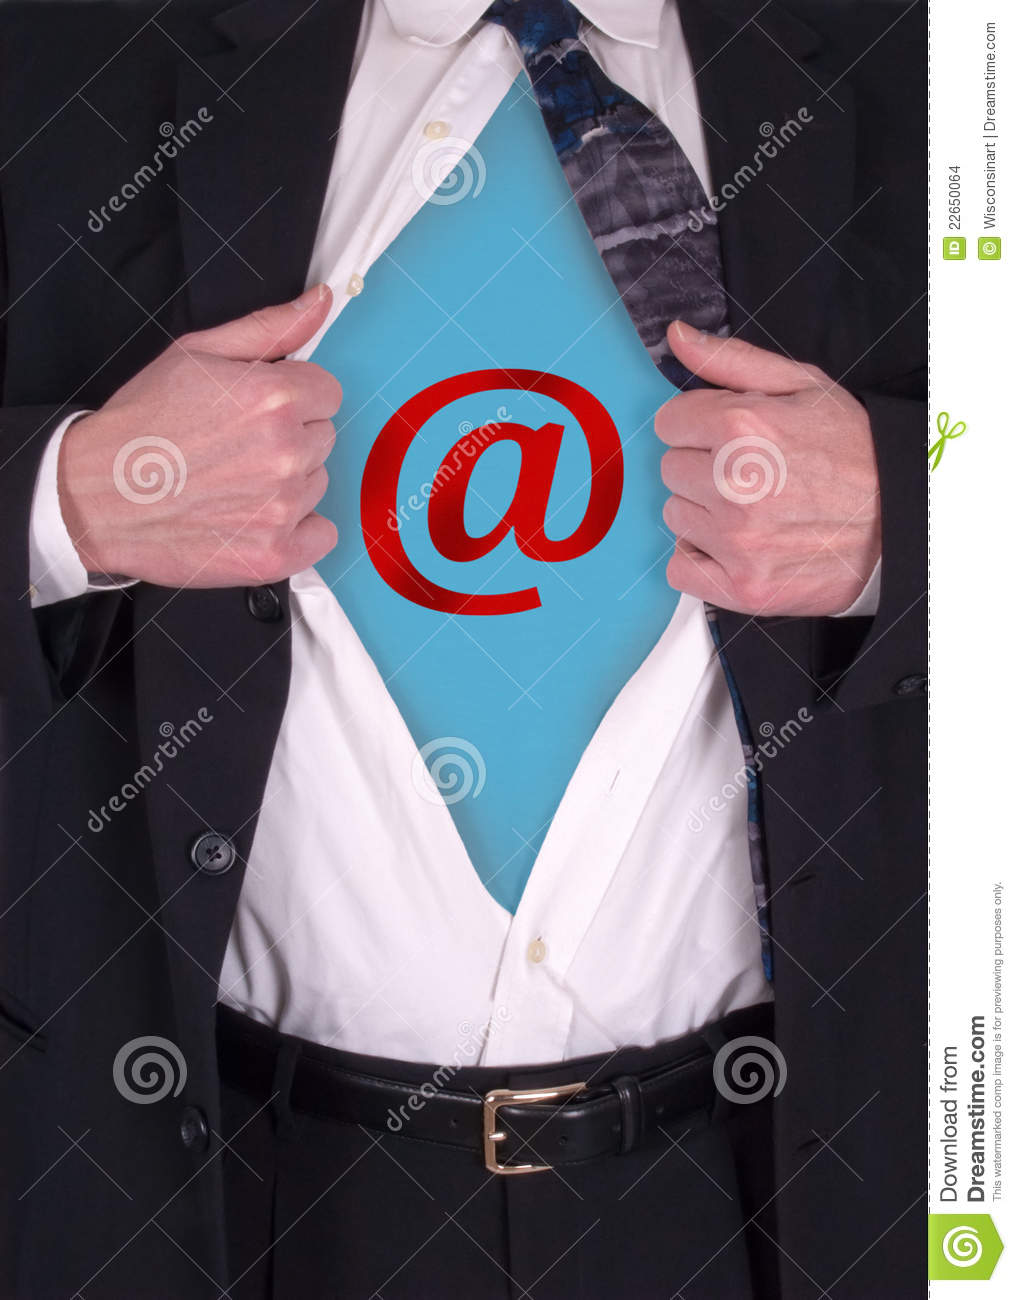     Superman Metaphor Of Businessman In Suit And Tie Turning Into A Man Of